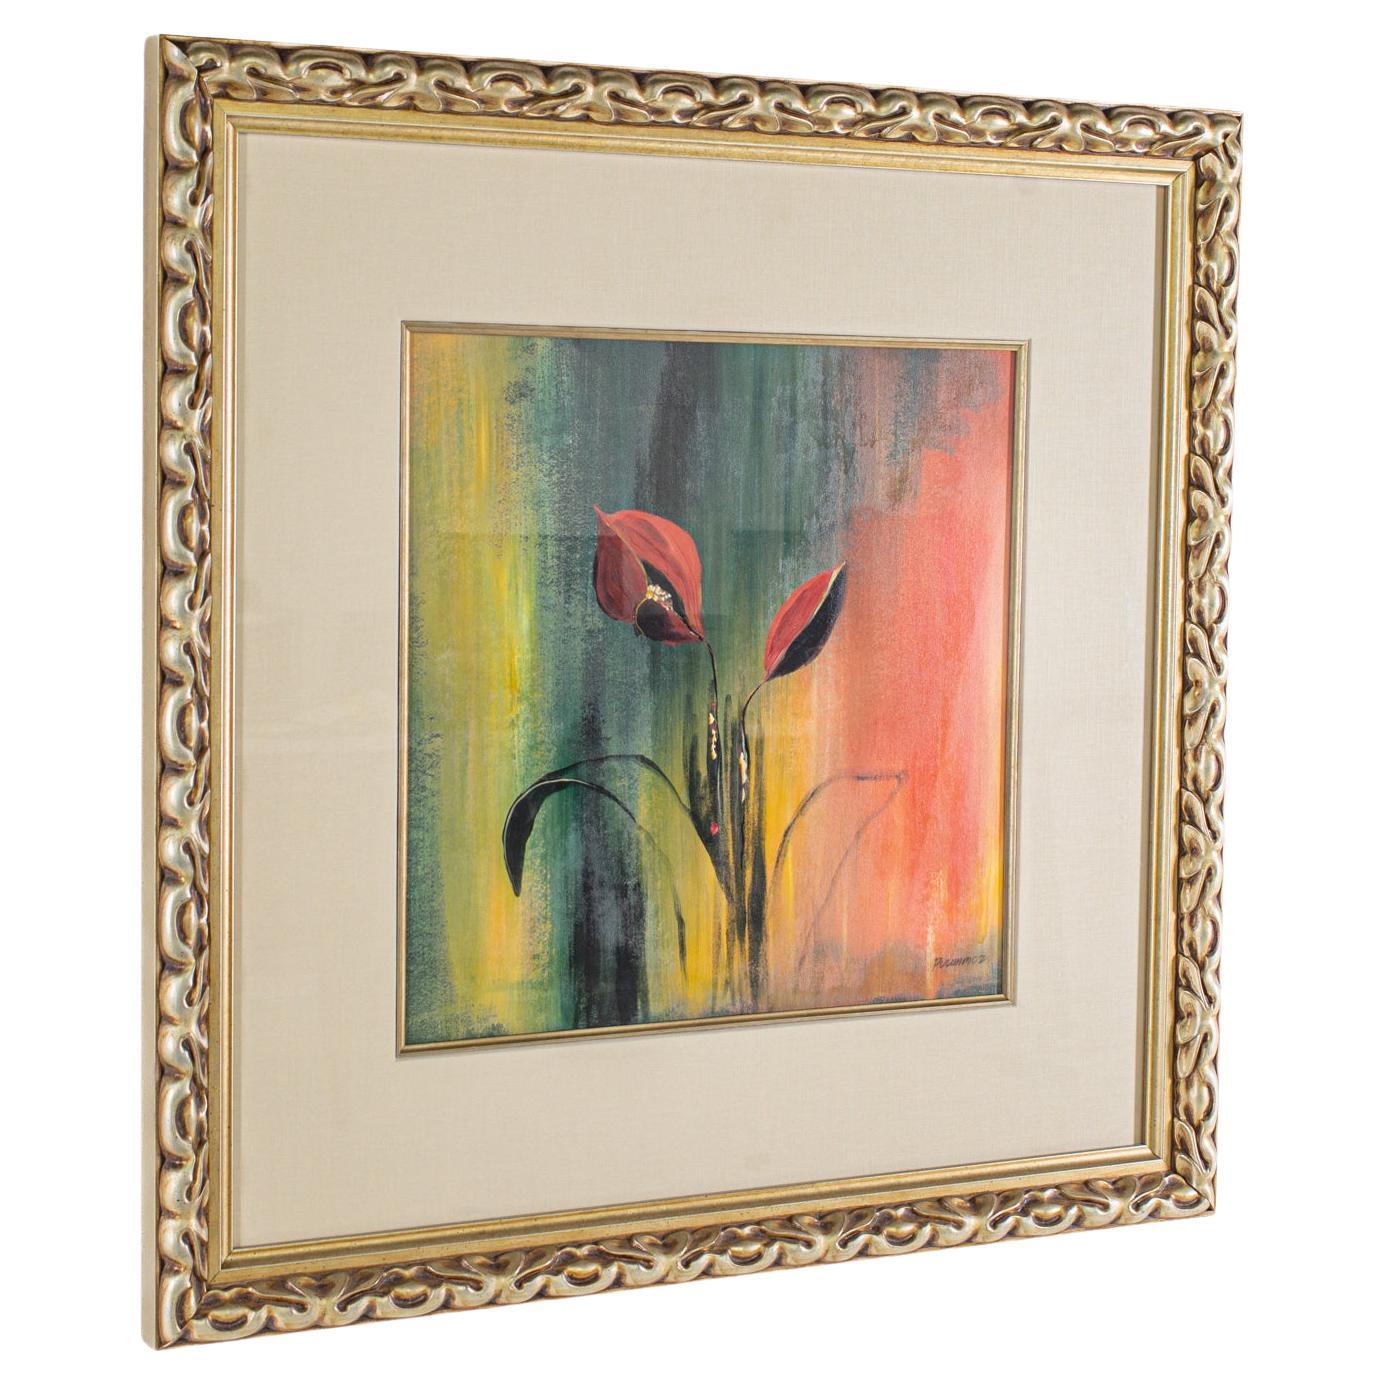 Puwamoz Framed Pair of Flowers Painting For Sale